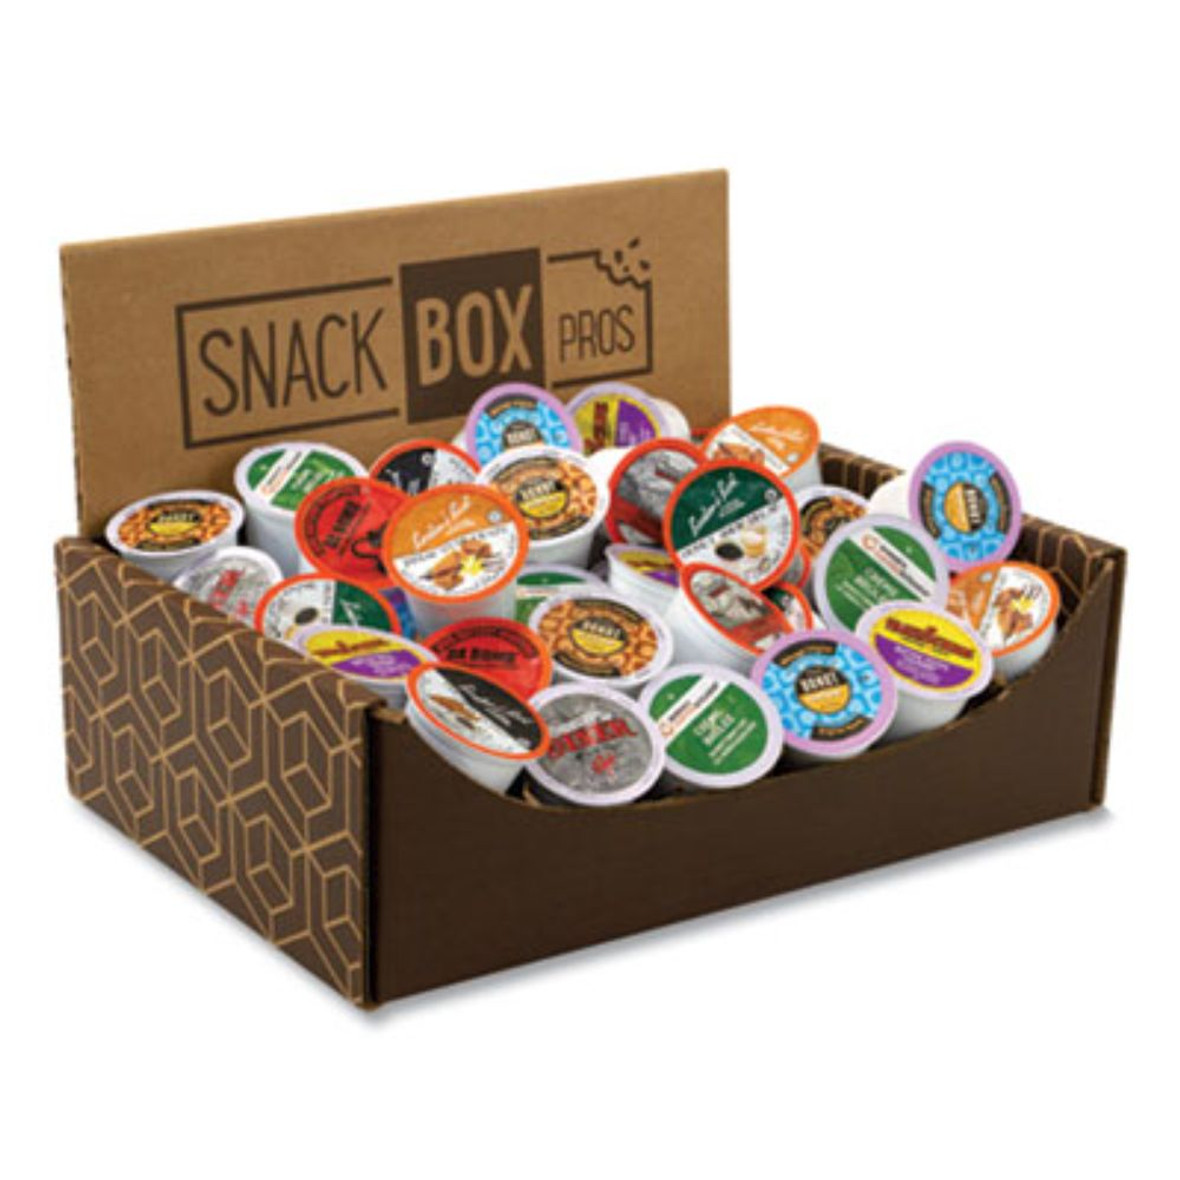 Snack Box Pros K-cup Assortment